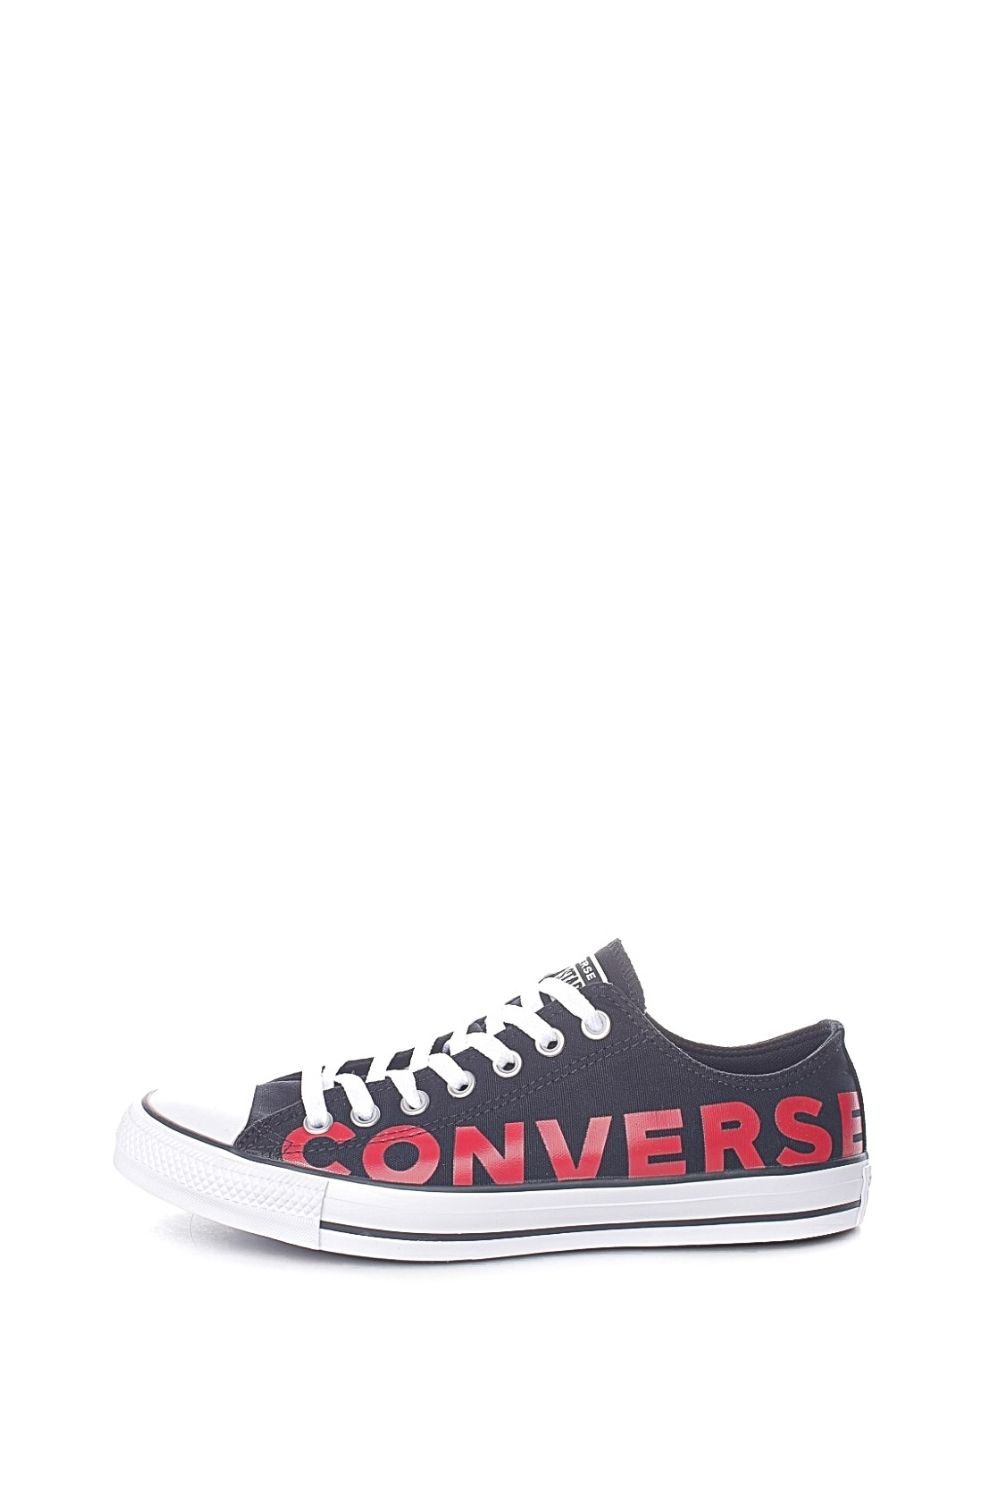 CONVERSE – Unisex sneakers CONVERSE Chuck Taylor All Star μαύρα 1725938.0-0871